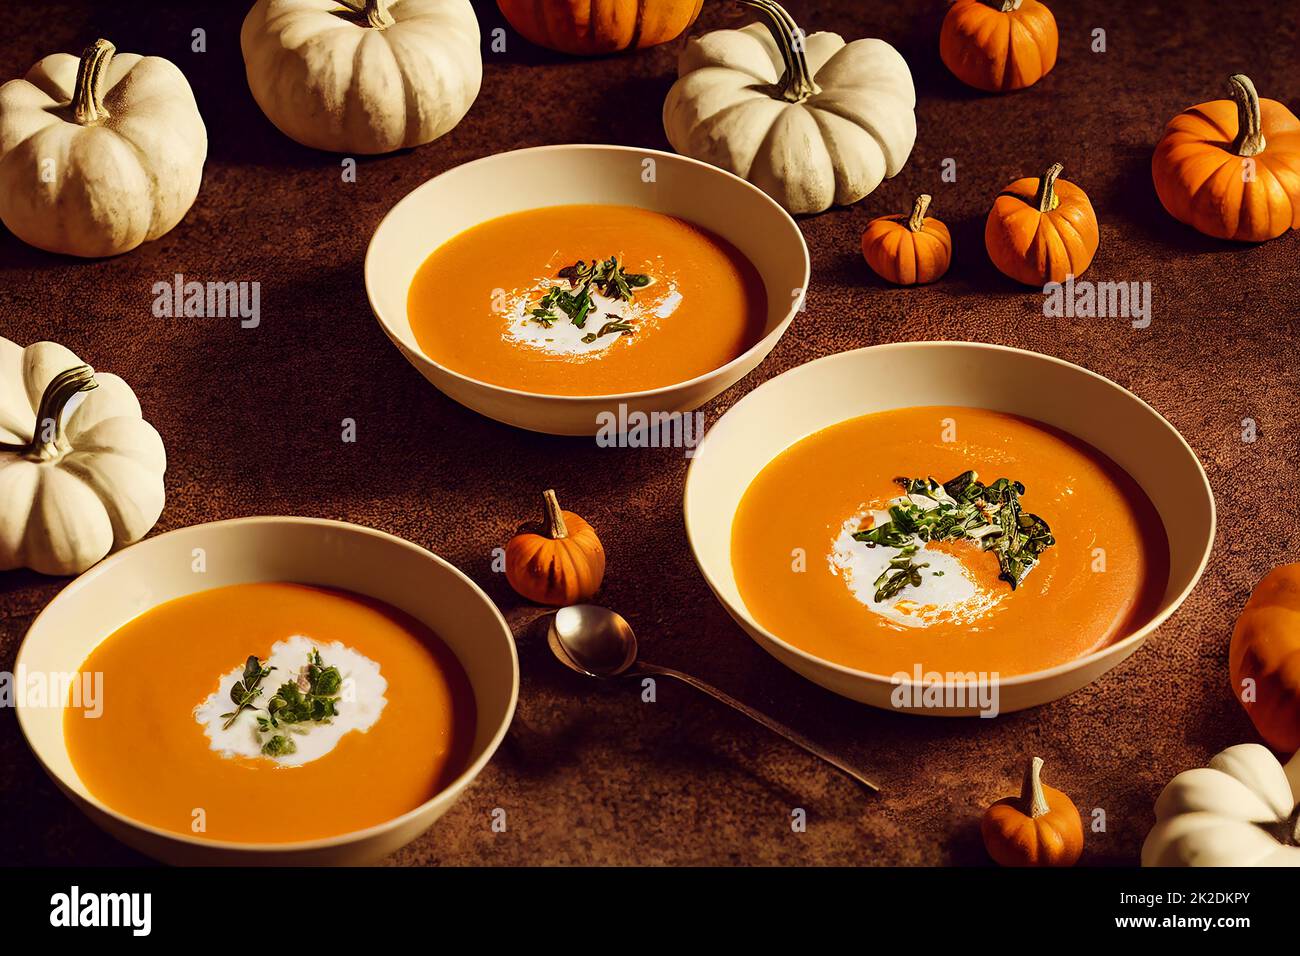 Pumpkin soup with cream, traditional fall meal recipe idea, food photography and illustration Stock Photo